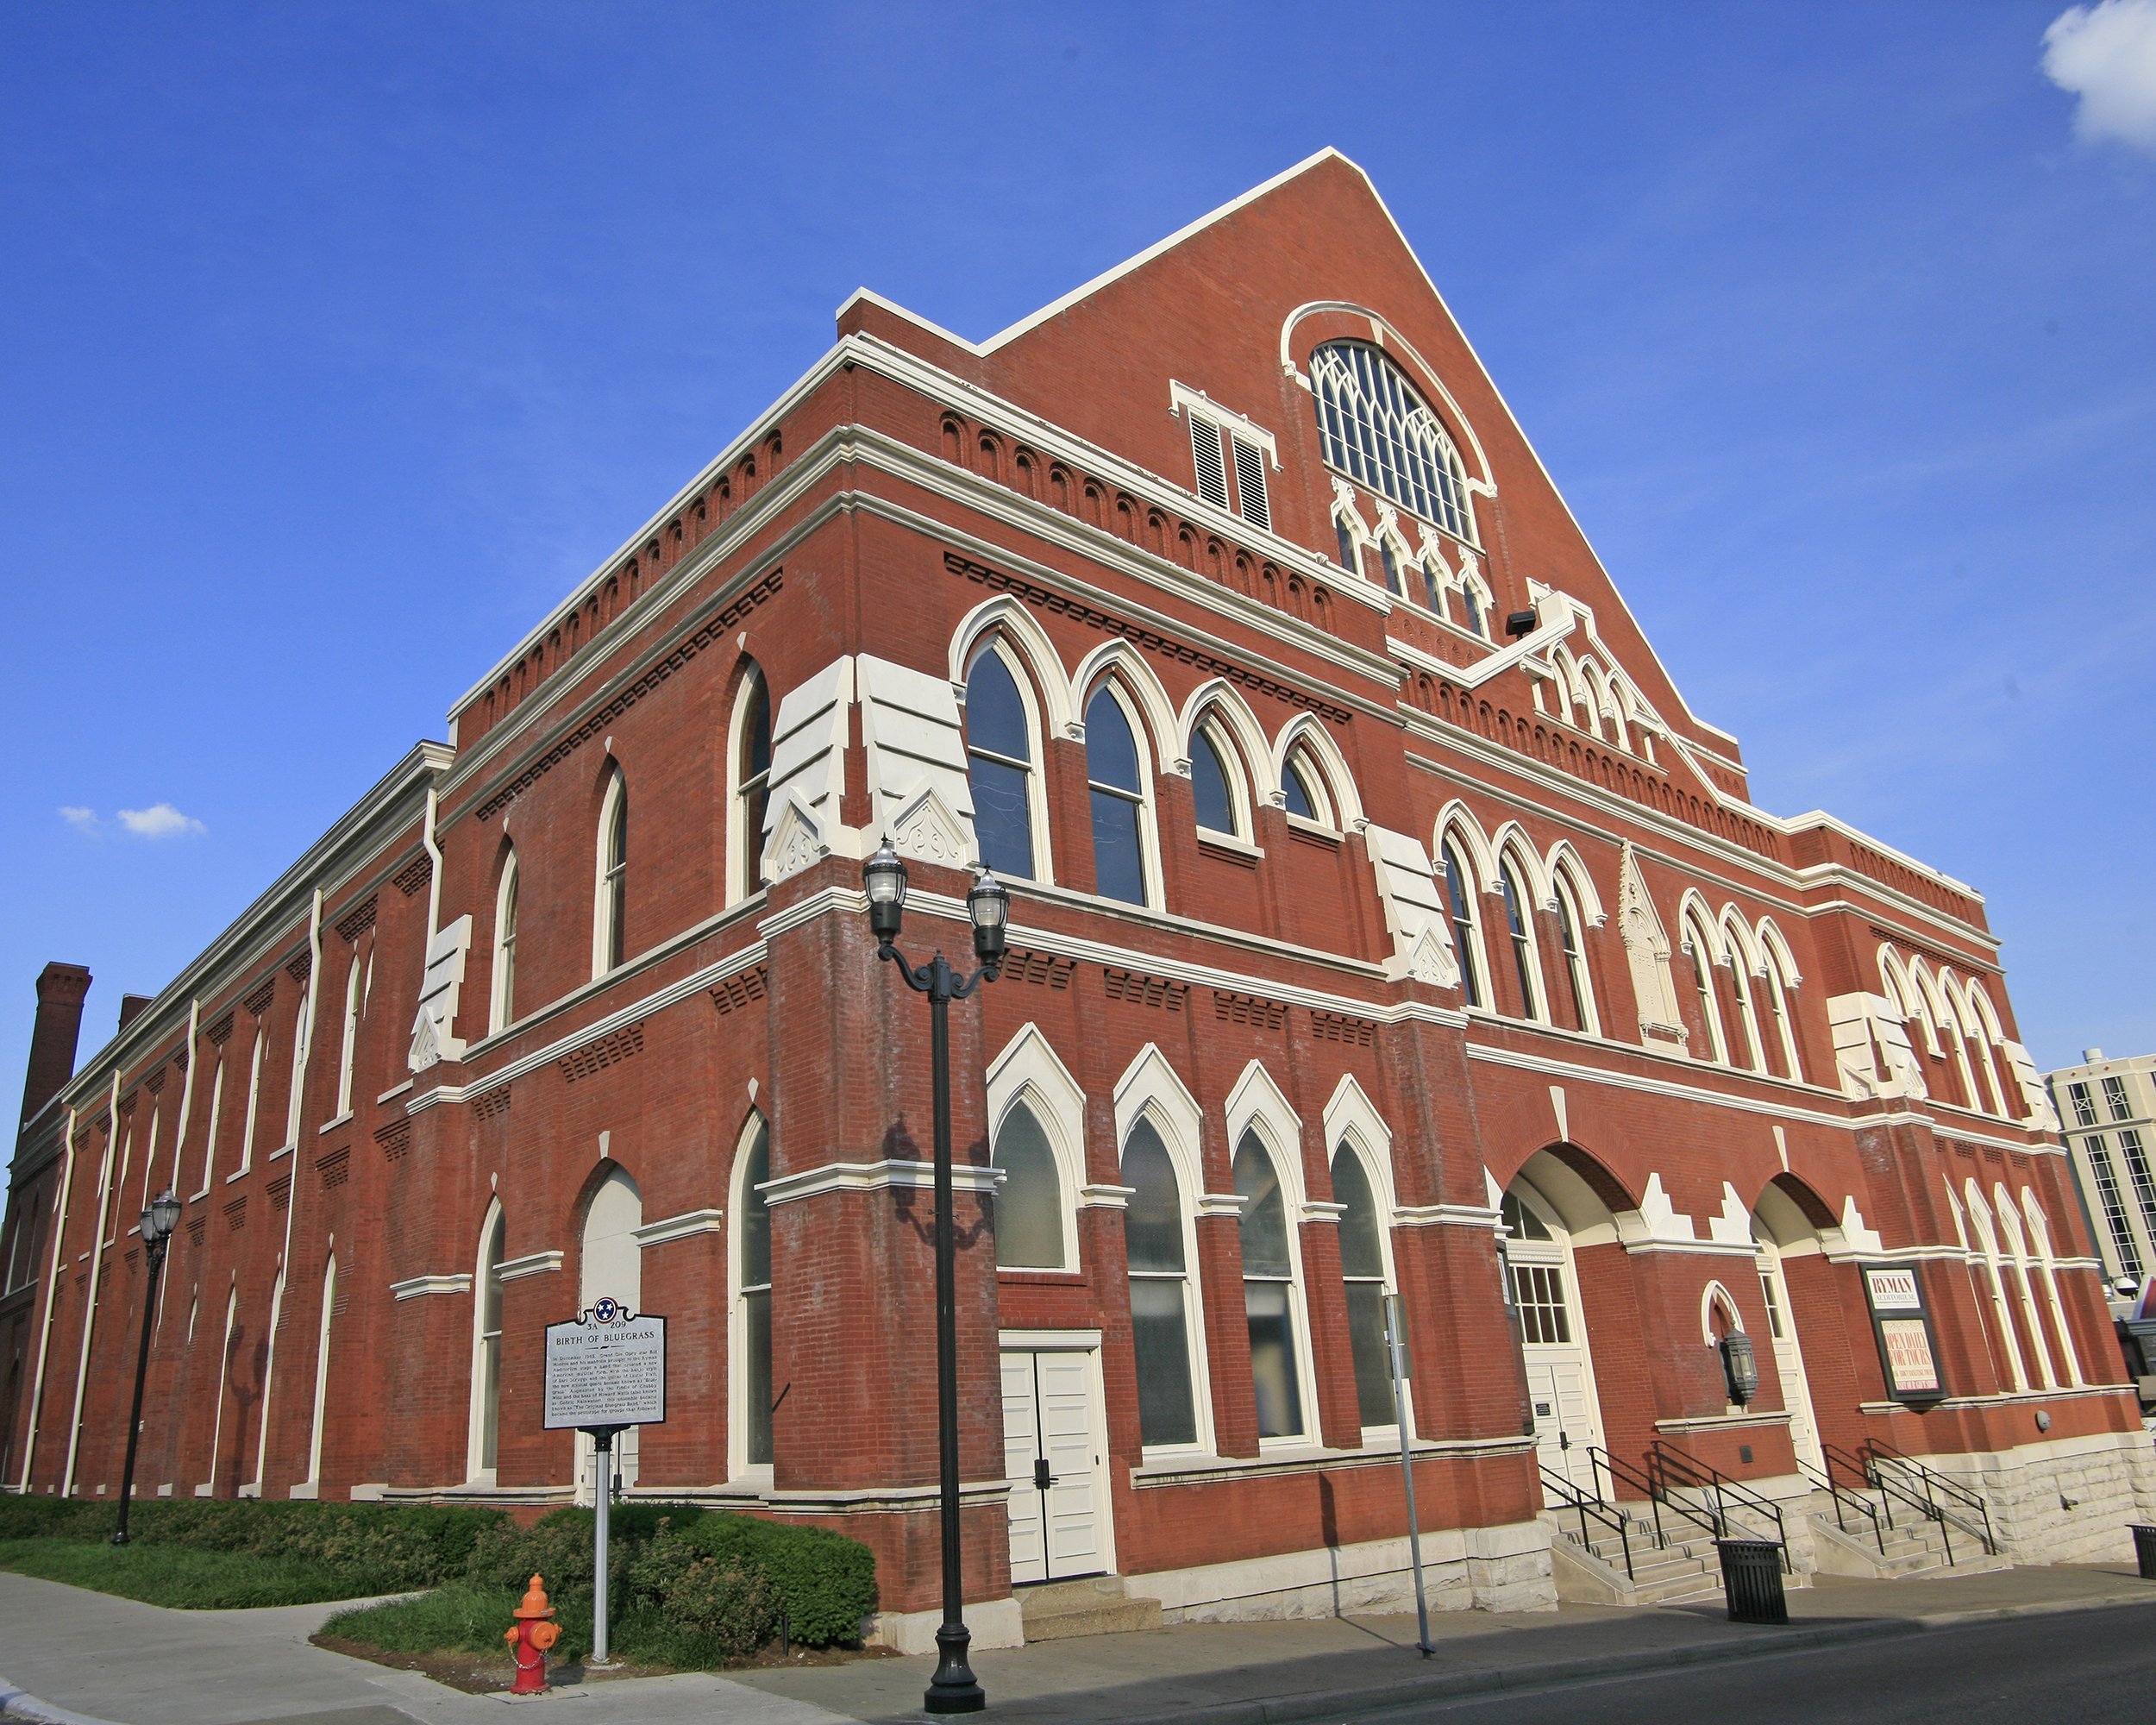 <p><strong>Where:</strong> Nashville, Tennessee <br><strong>Miles from highway:</strong> 1 <br>Known as "the Mother Church of Country Music," Ryman Auditorium celebrated its 125th anniversary in 2017. Visitors get to peek at costumes, memorabilia, and dressing rooms used by celebrities.</p>